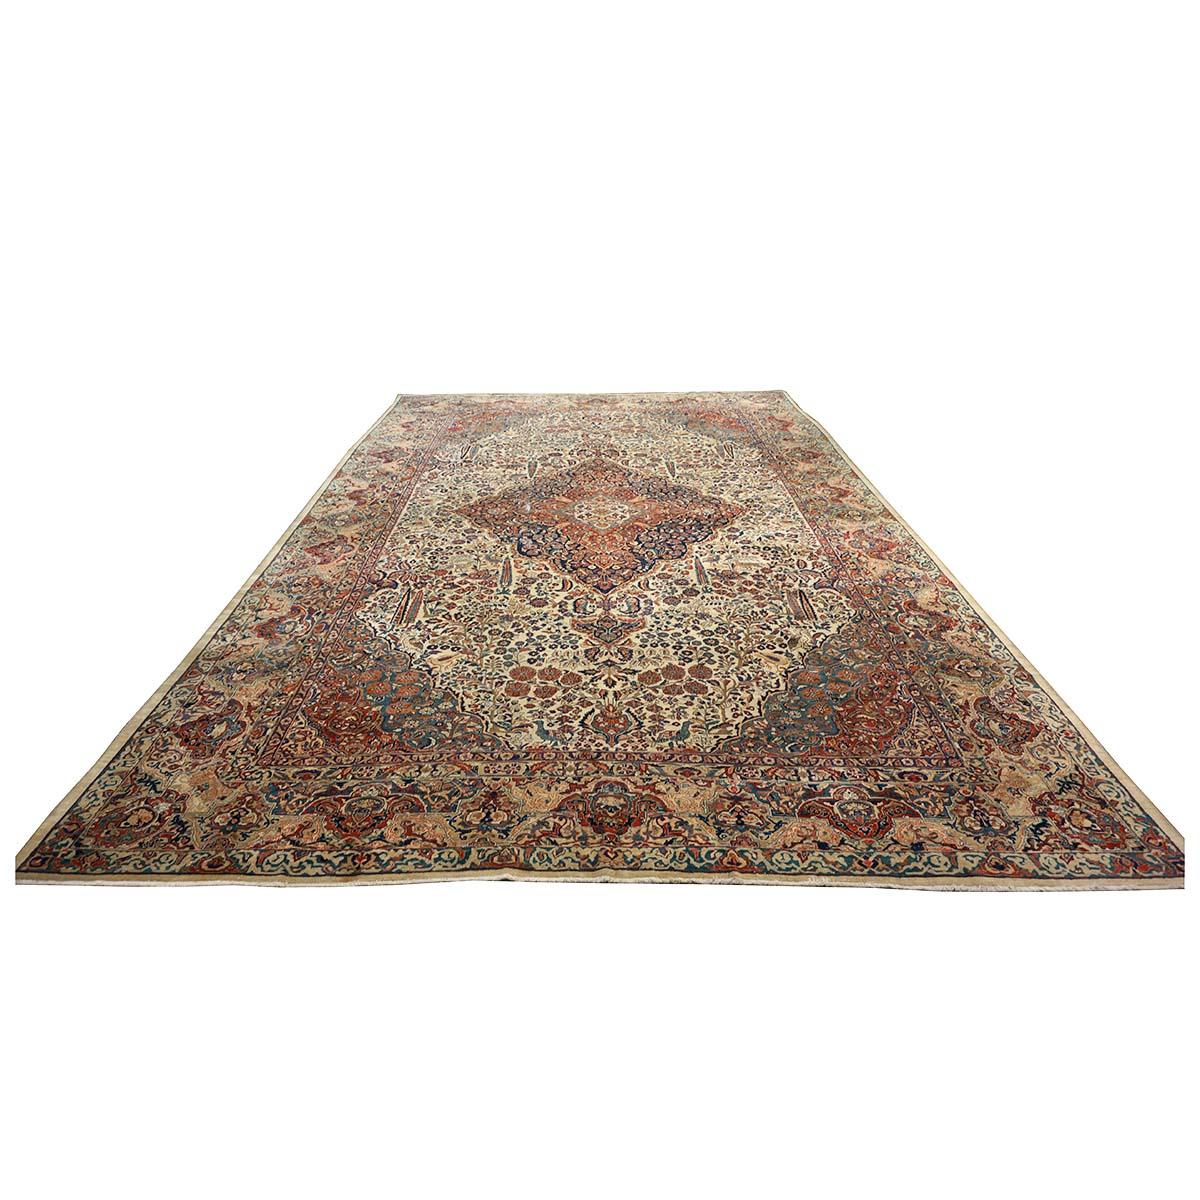 Ashly Fine Rugs presents an Antique Persian Sarouk Mahajaran 12x19 Oversized Area Rug. Mahajaran Sarouk rugs were woven in central Persia’s Sultanabad (later called Arak) province. This 100-year-old rug has a rare, beautiful ivory background with